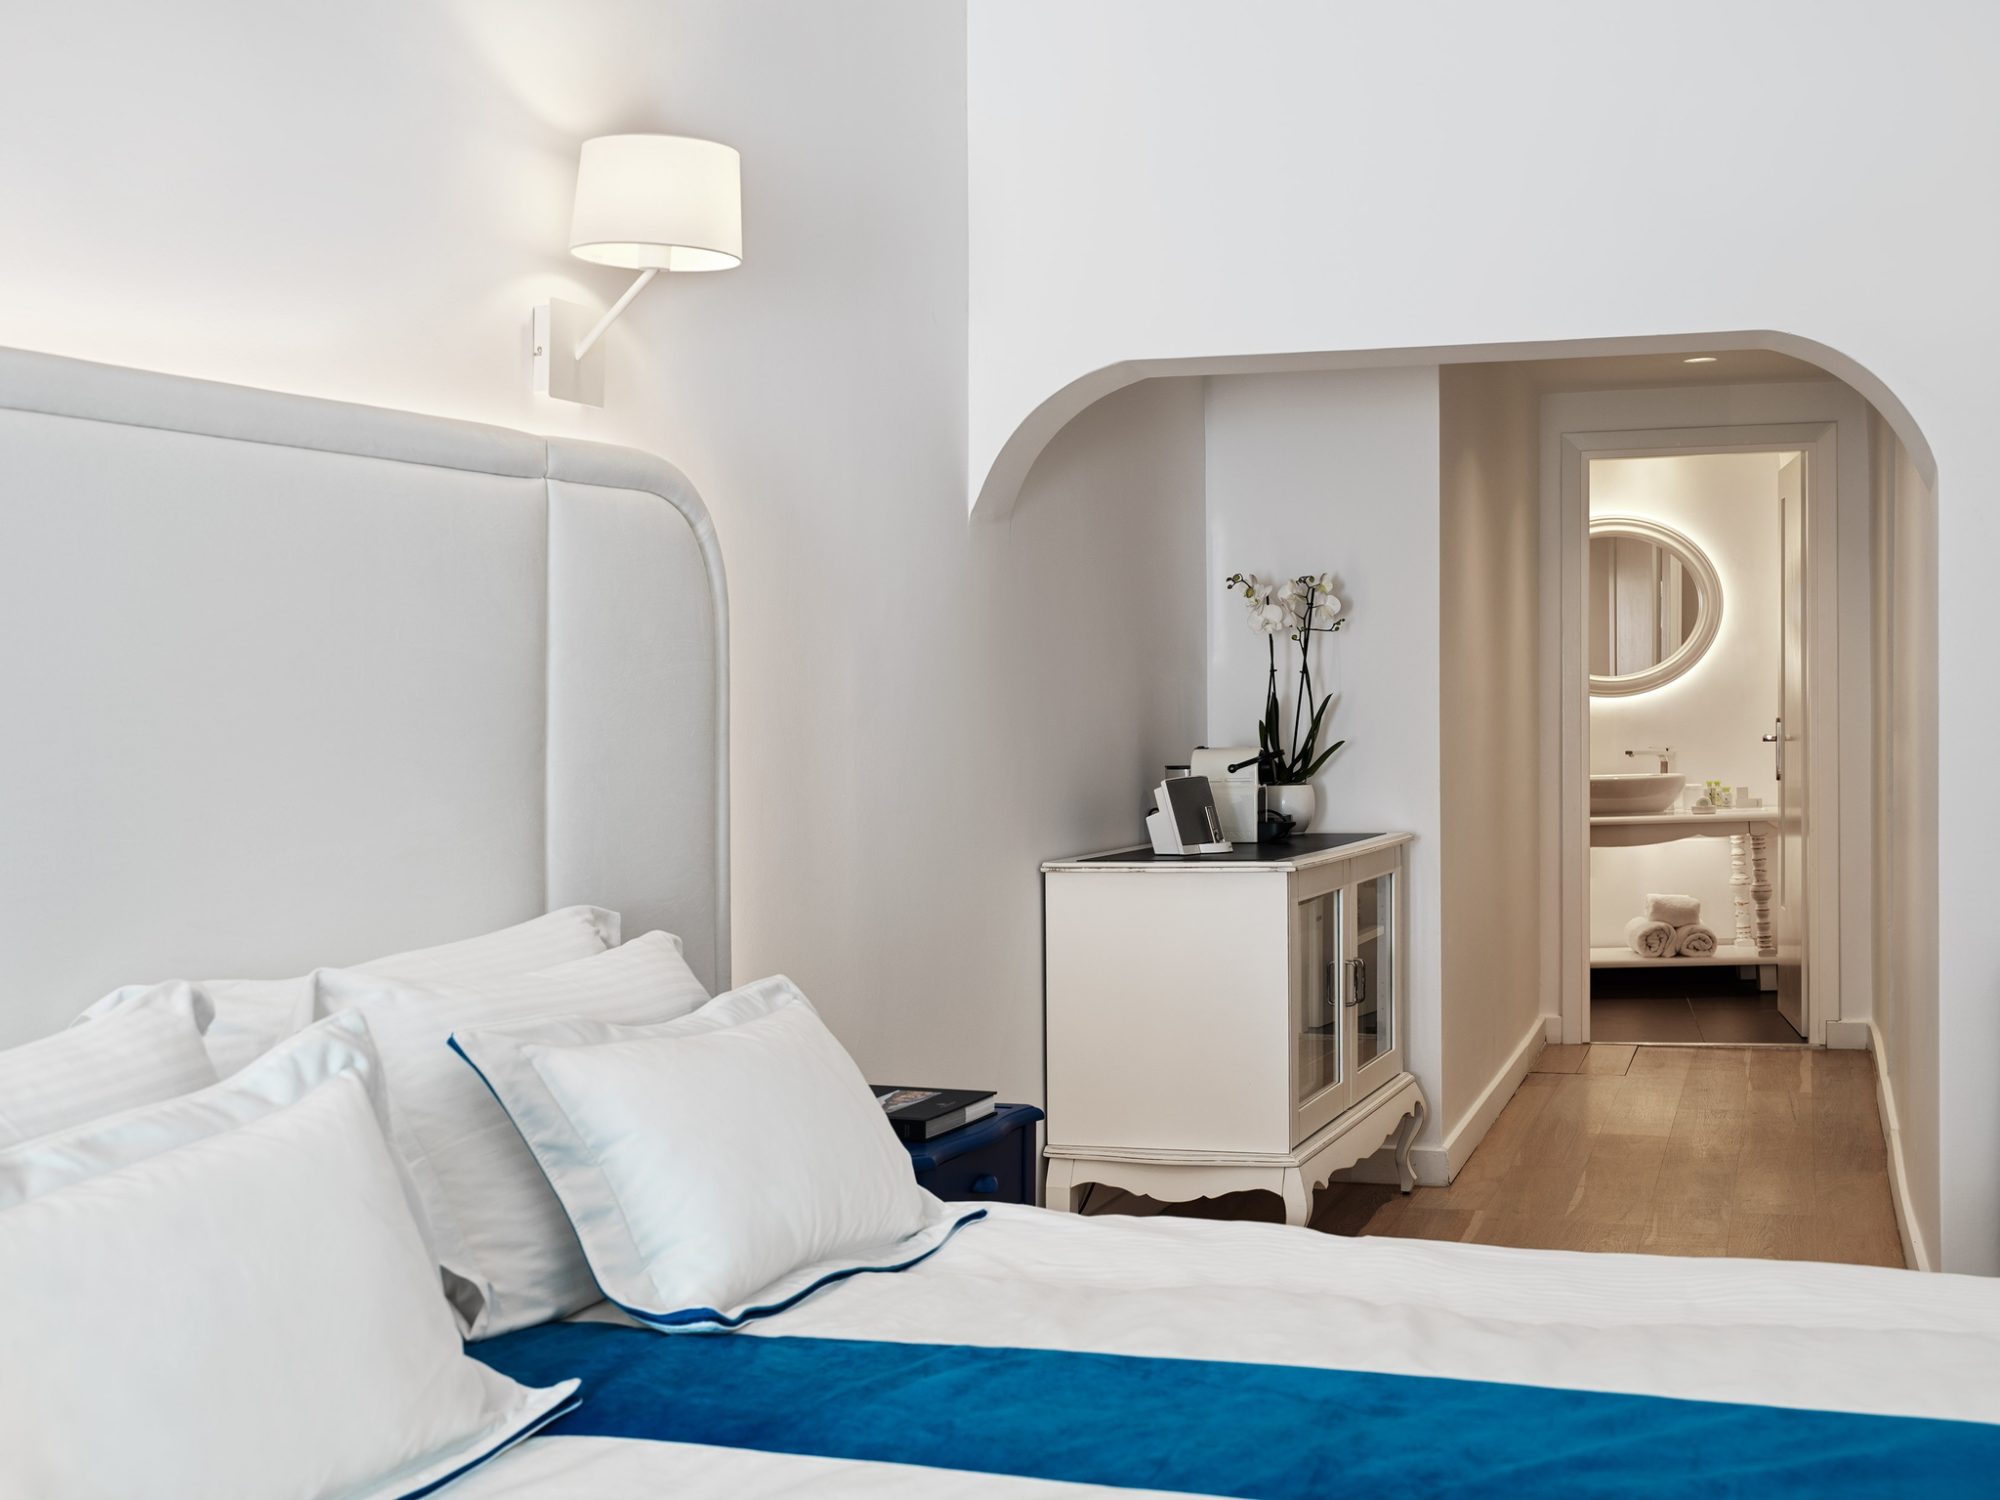 Katikies hotel in Oia Santorini inspires deep emotions of enchantment and fascination